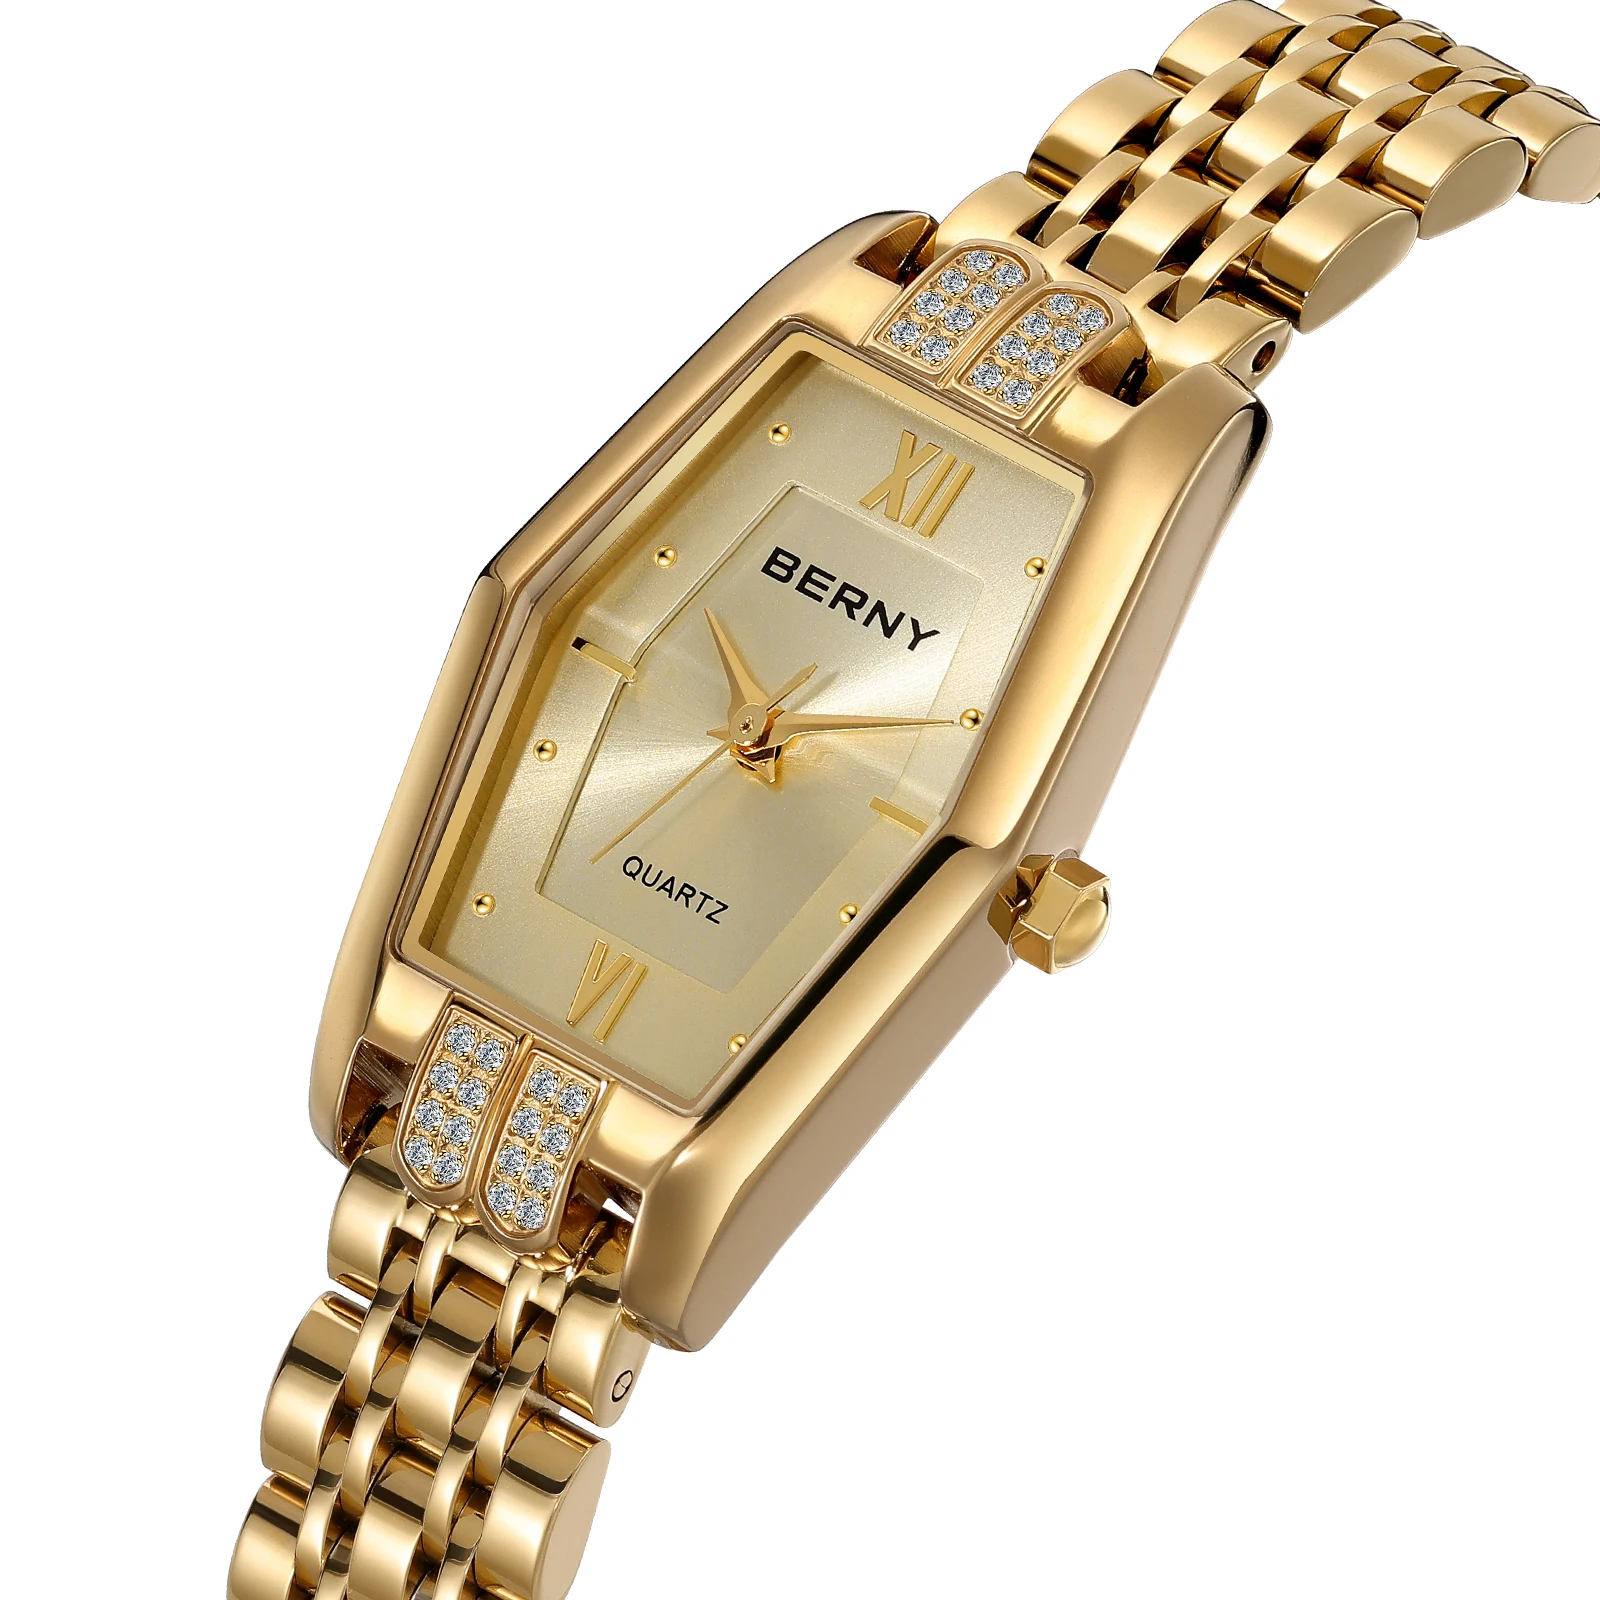 Berny Ladies Wristwatch Quartz Luxury Rose Gold Watch Stainless steel High Accuracy in time Waterproof with 16 Diamonds Inlaid enlarge